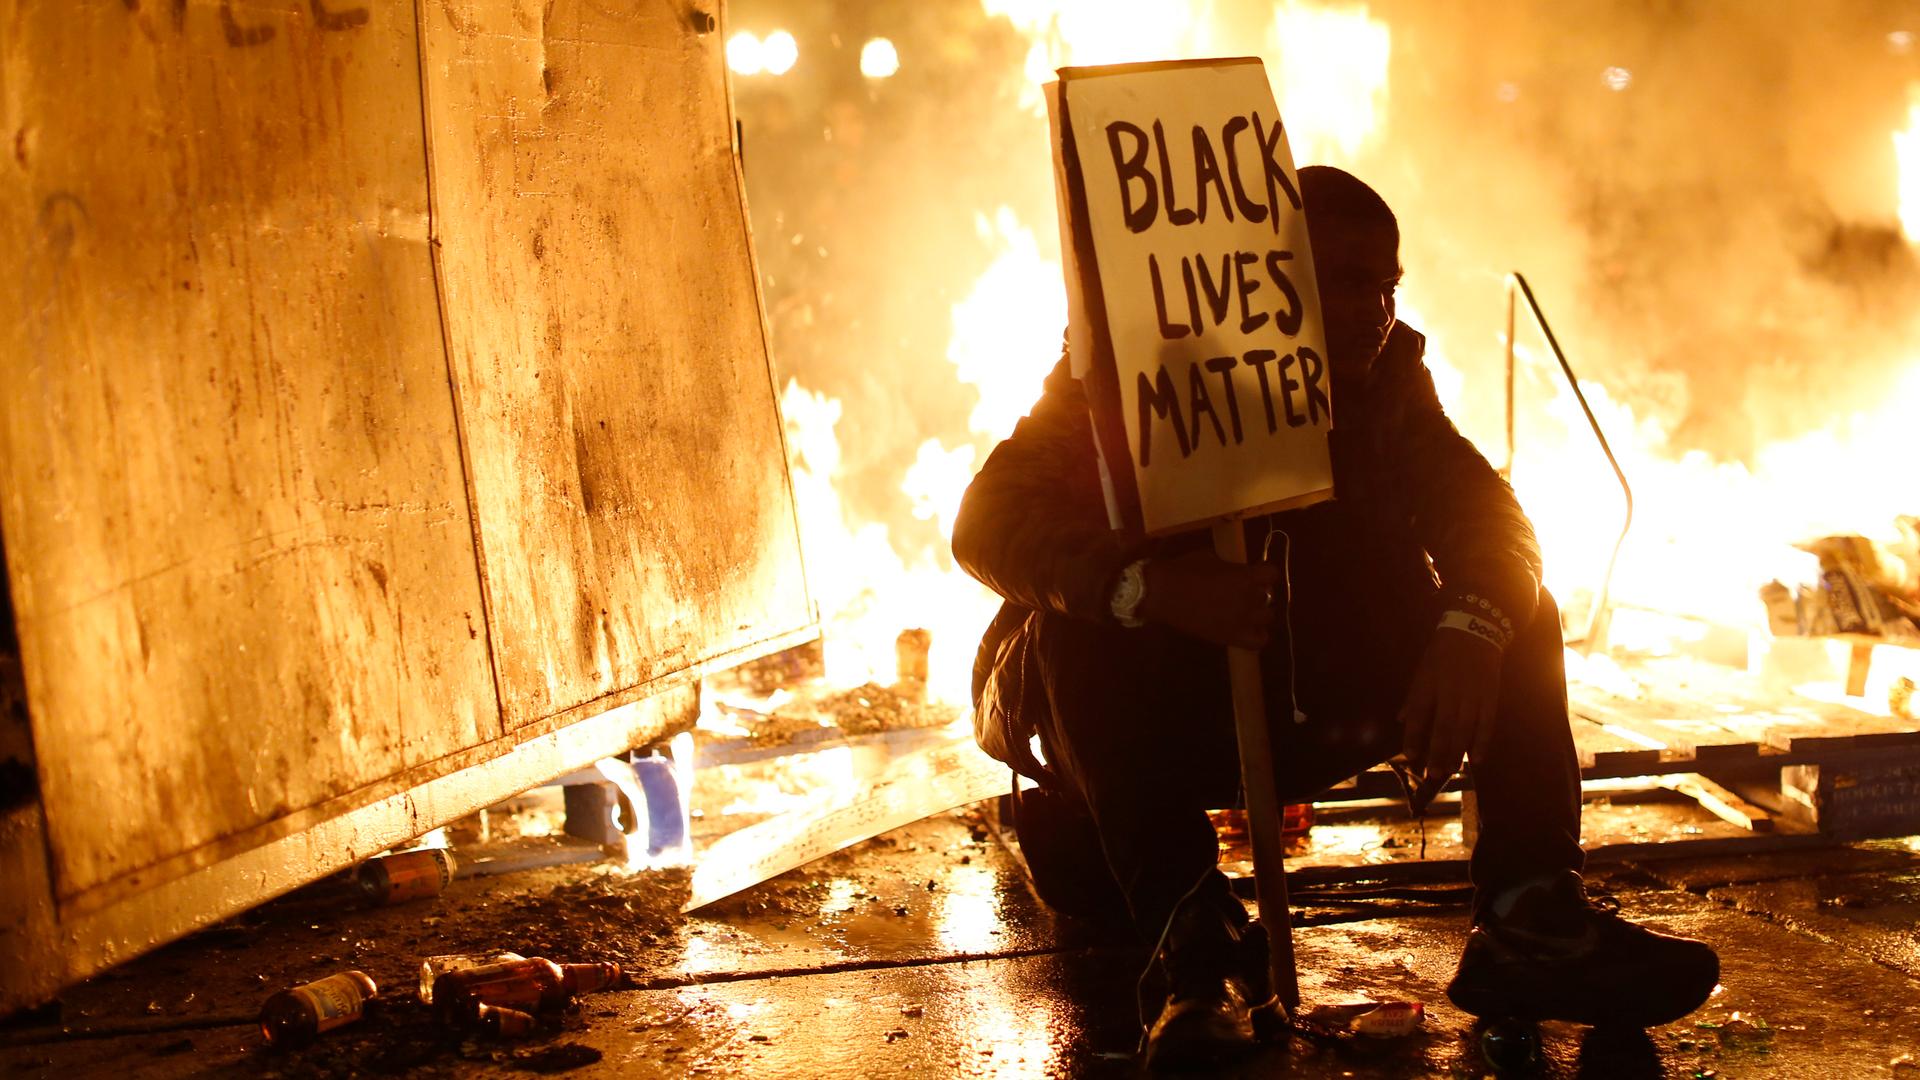 A demonstrator sits in front of a street fire during a demonstration following the grand jury decision in the Ferguson, Missouri shooting of Michael Brown, in Oakland, California on November 25, 2014.